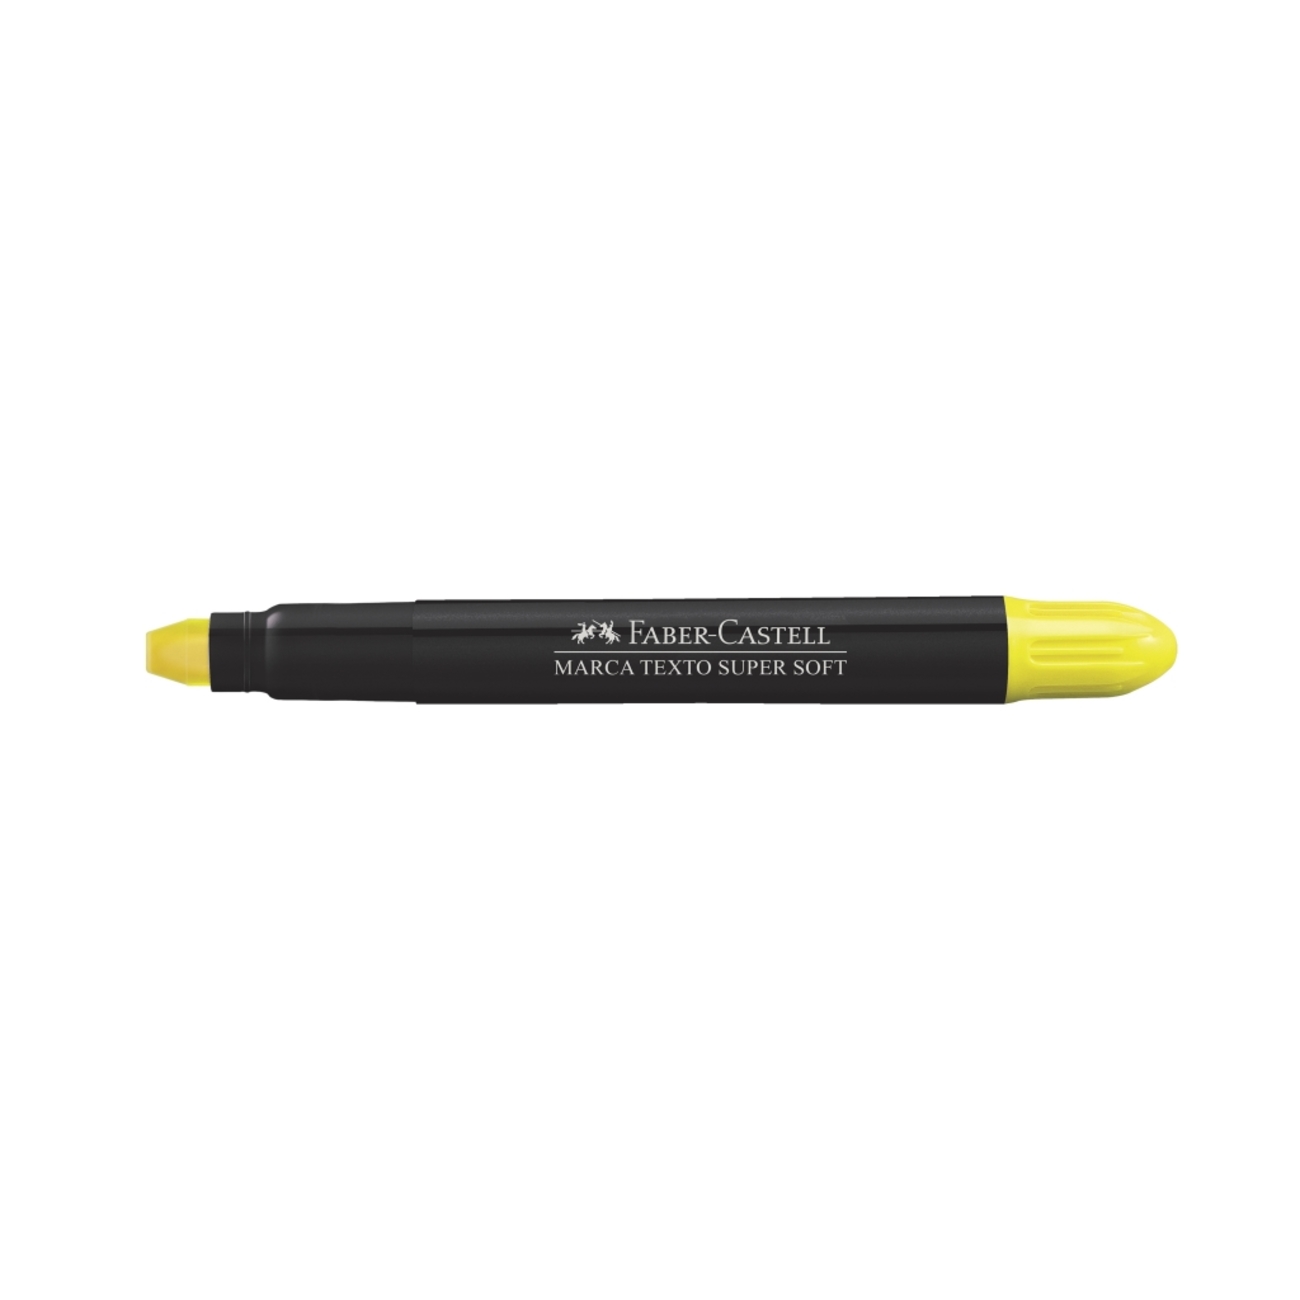 Marca Texto Faber-Castell SuperSoft Gel Amarelo 1 Cx C/ 24 Ctl